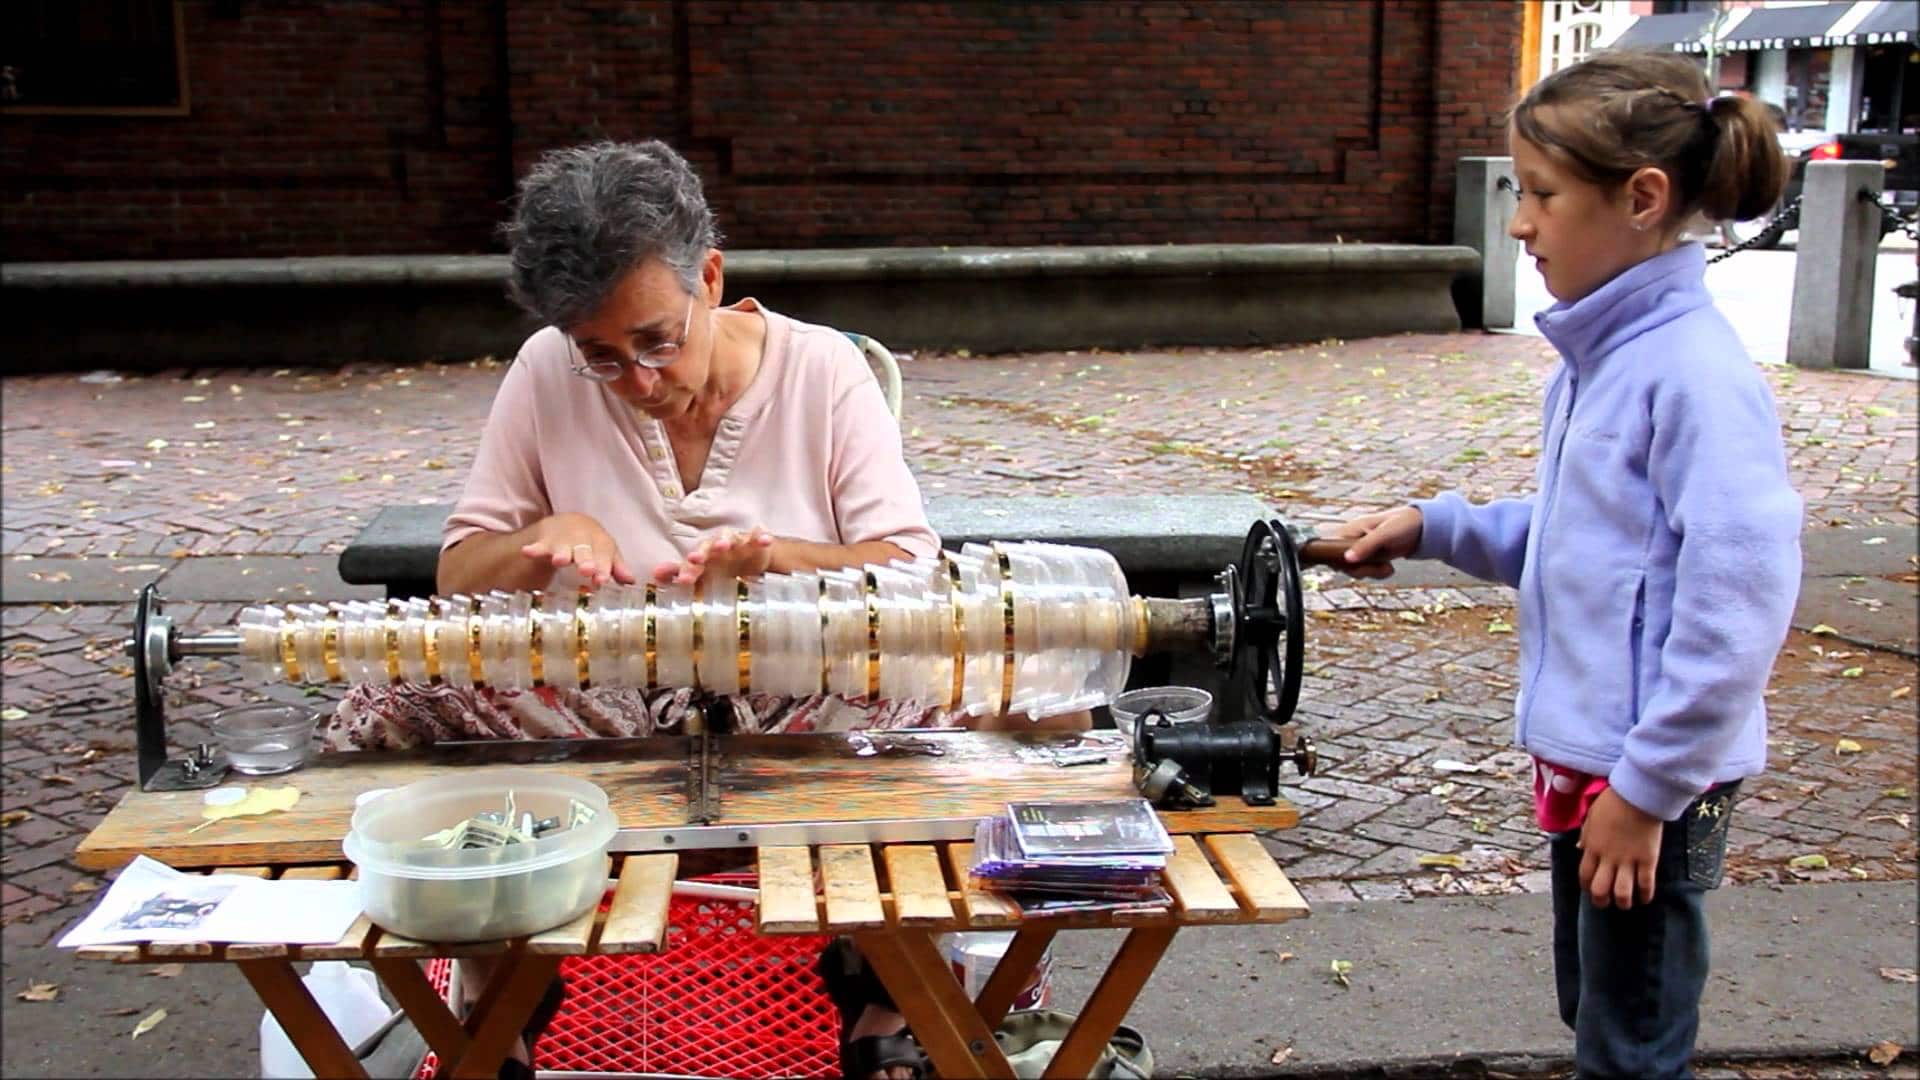 The Glass Armonica, Benjamin Franklin's 1761 invention. The Kid